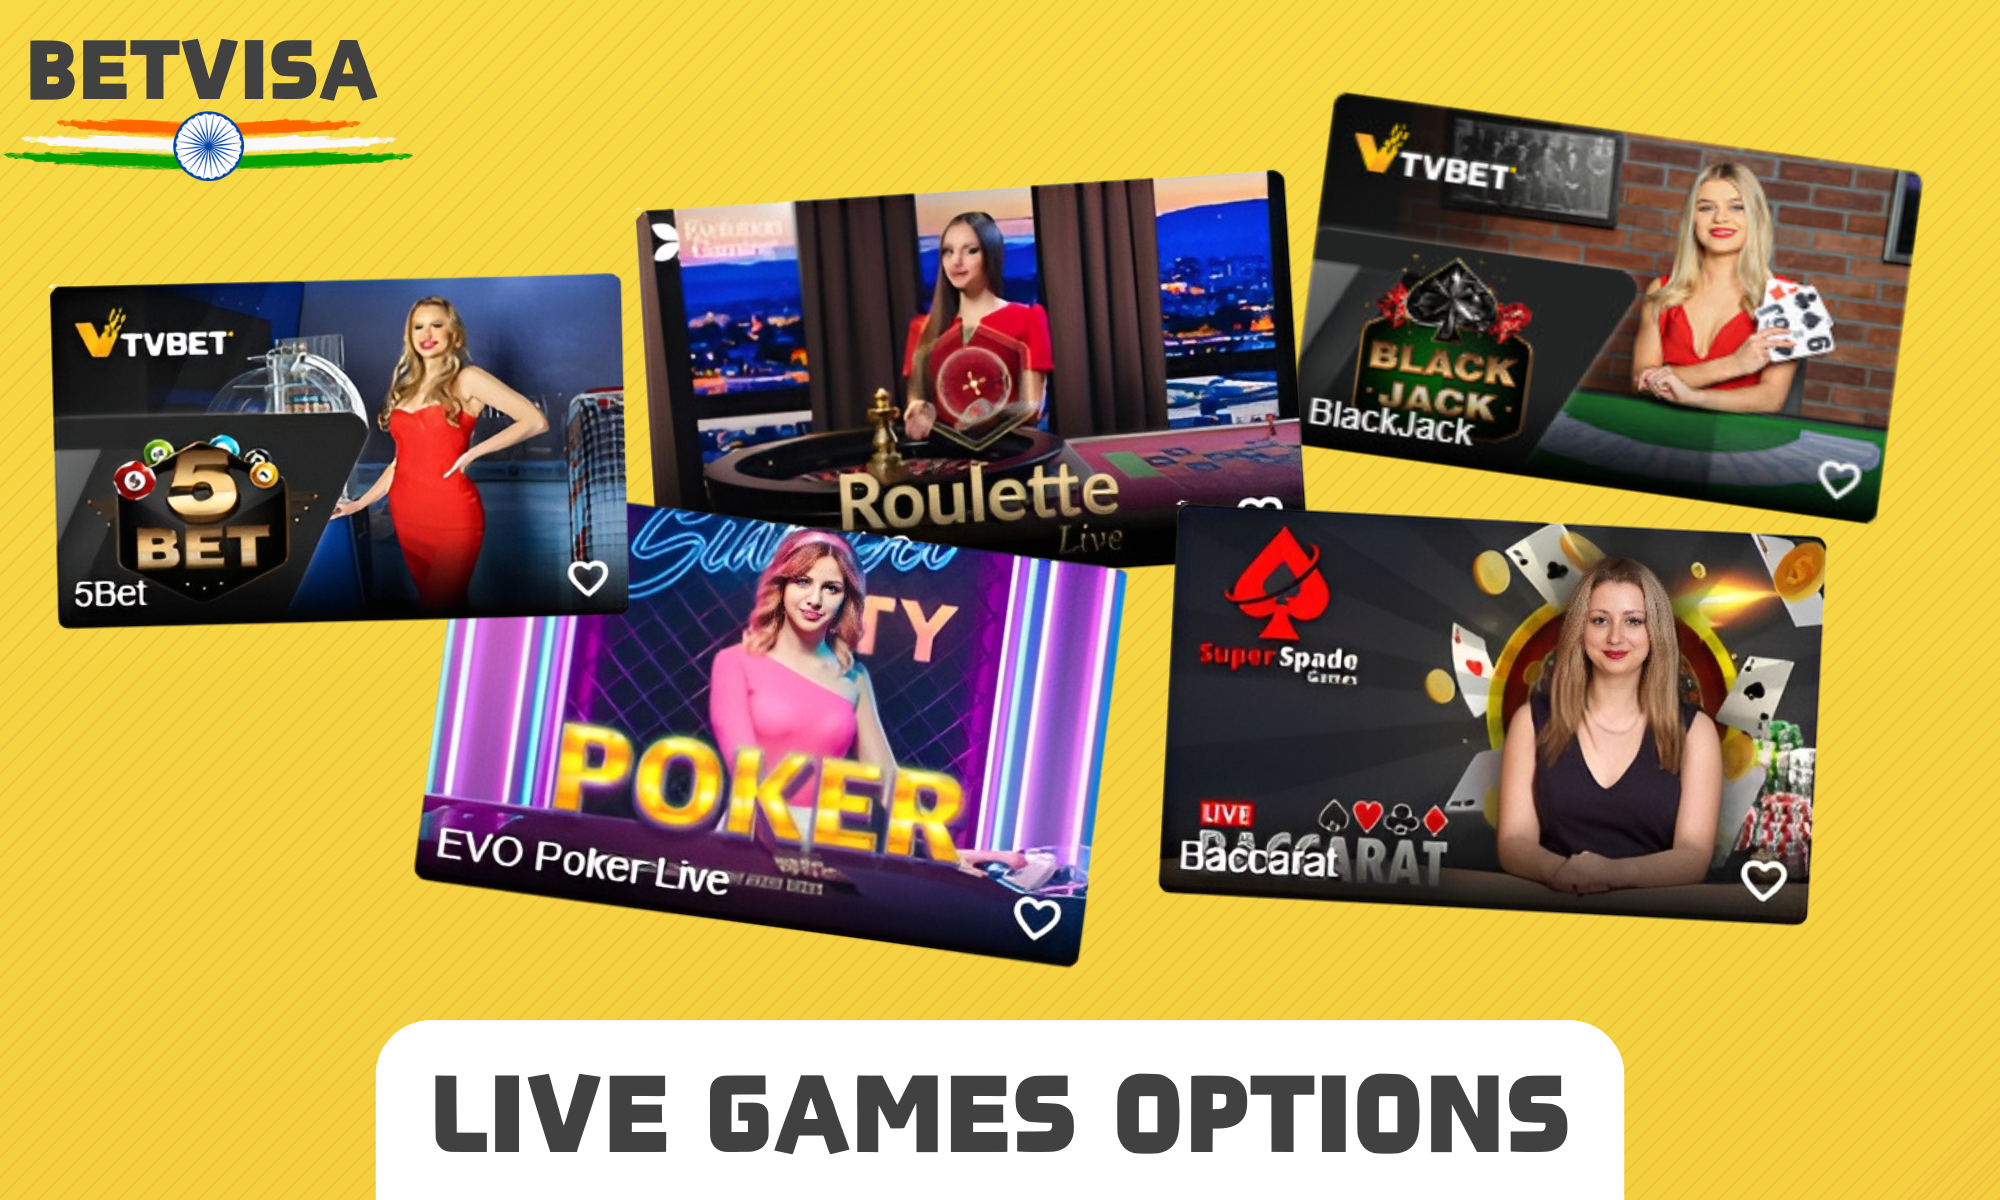 Betvisa live casino offers a variety of real-time gaming options